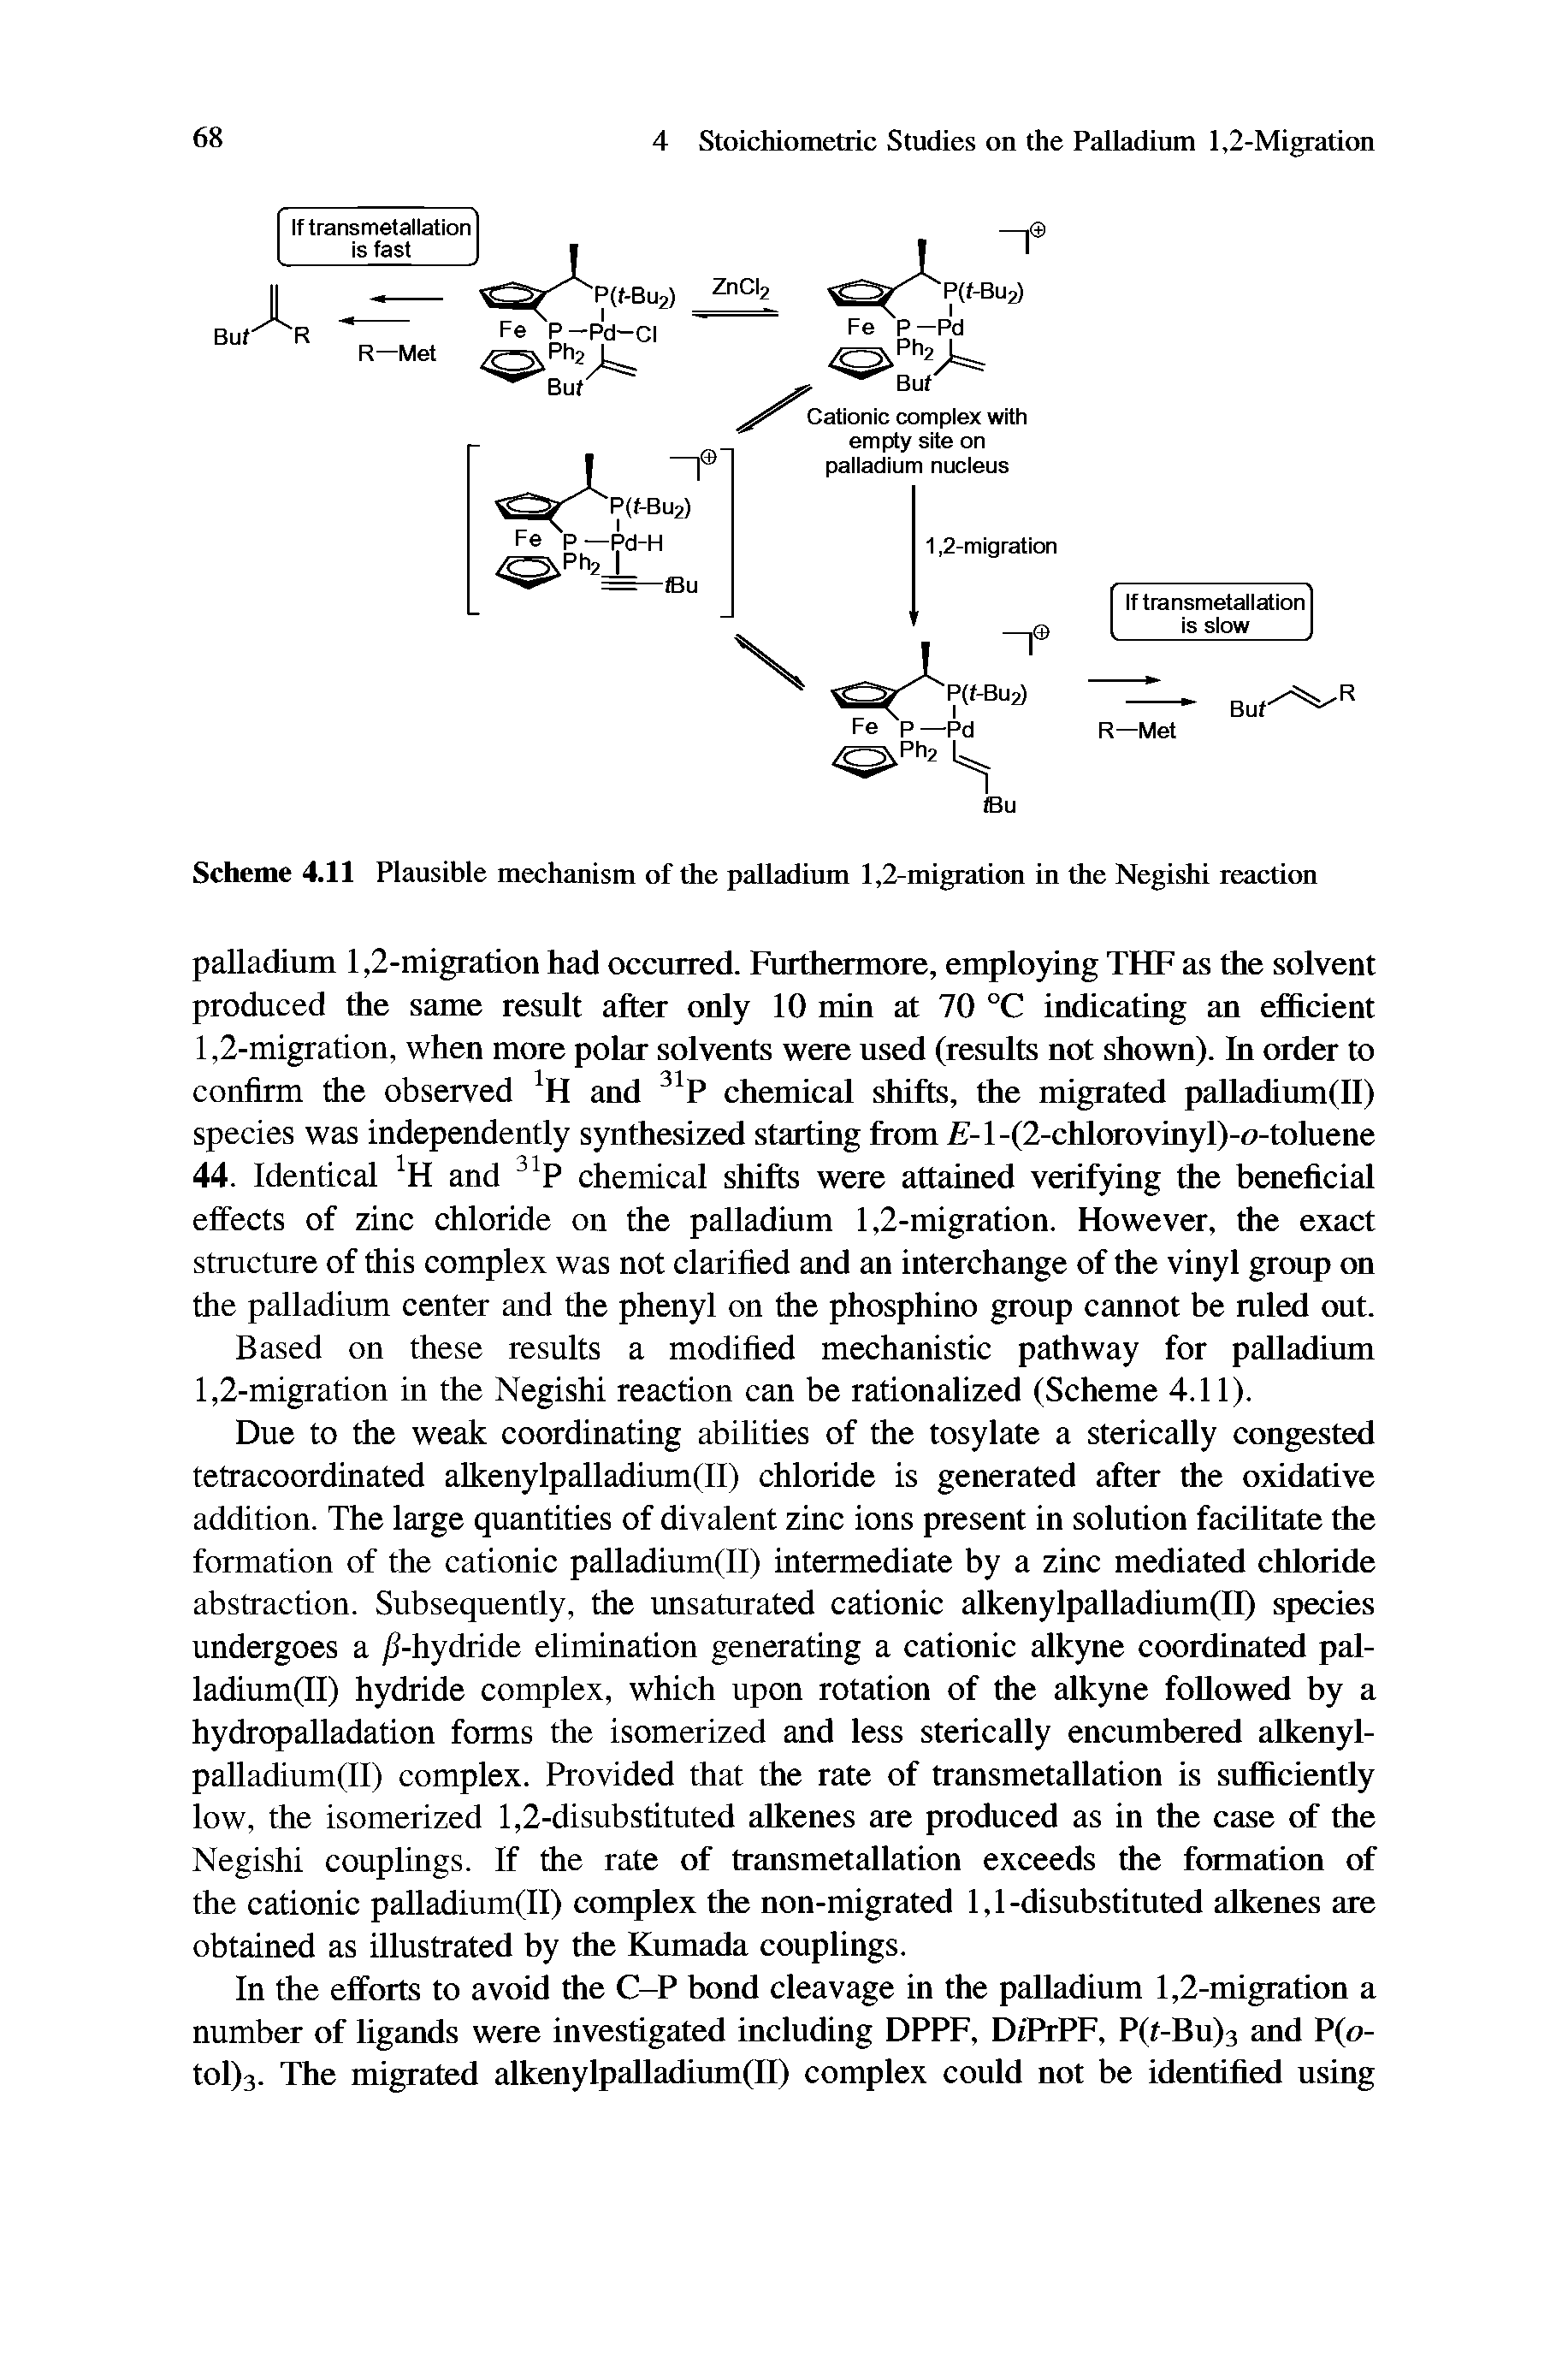 Scheme 4.11 Plausible mechanism of the palladium 1,2-migration in the Negishi reaction...